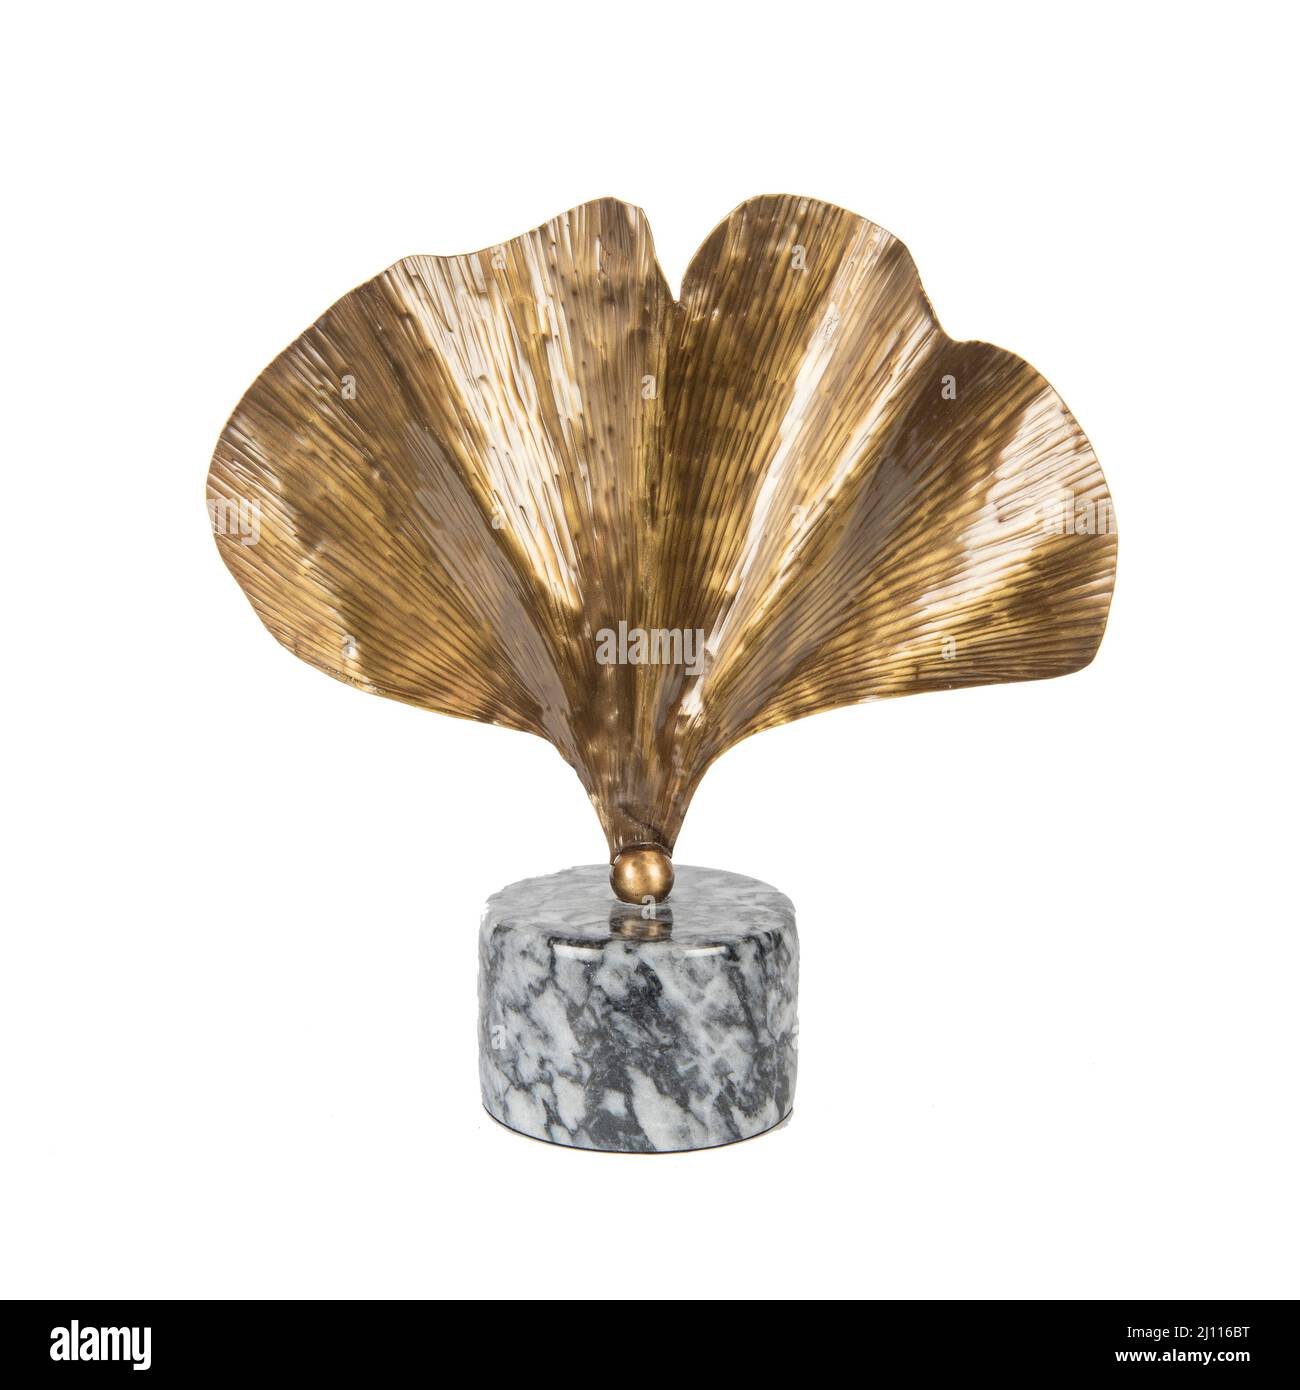 Shell sculpture Cut Out Stock Images & Pictures - Alamy